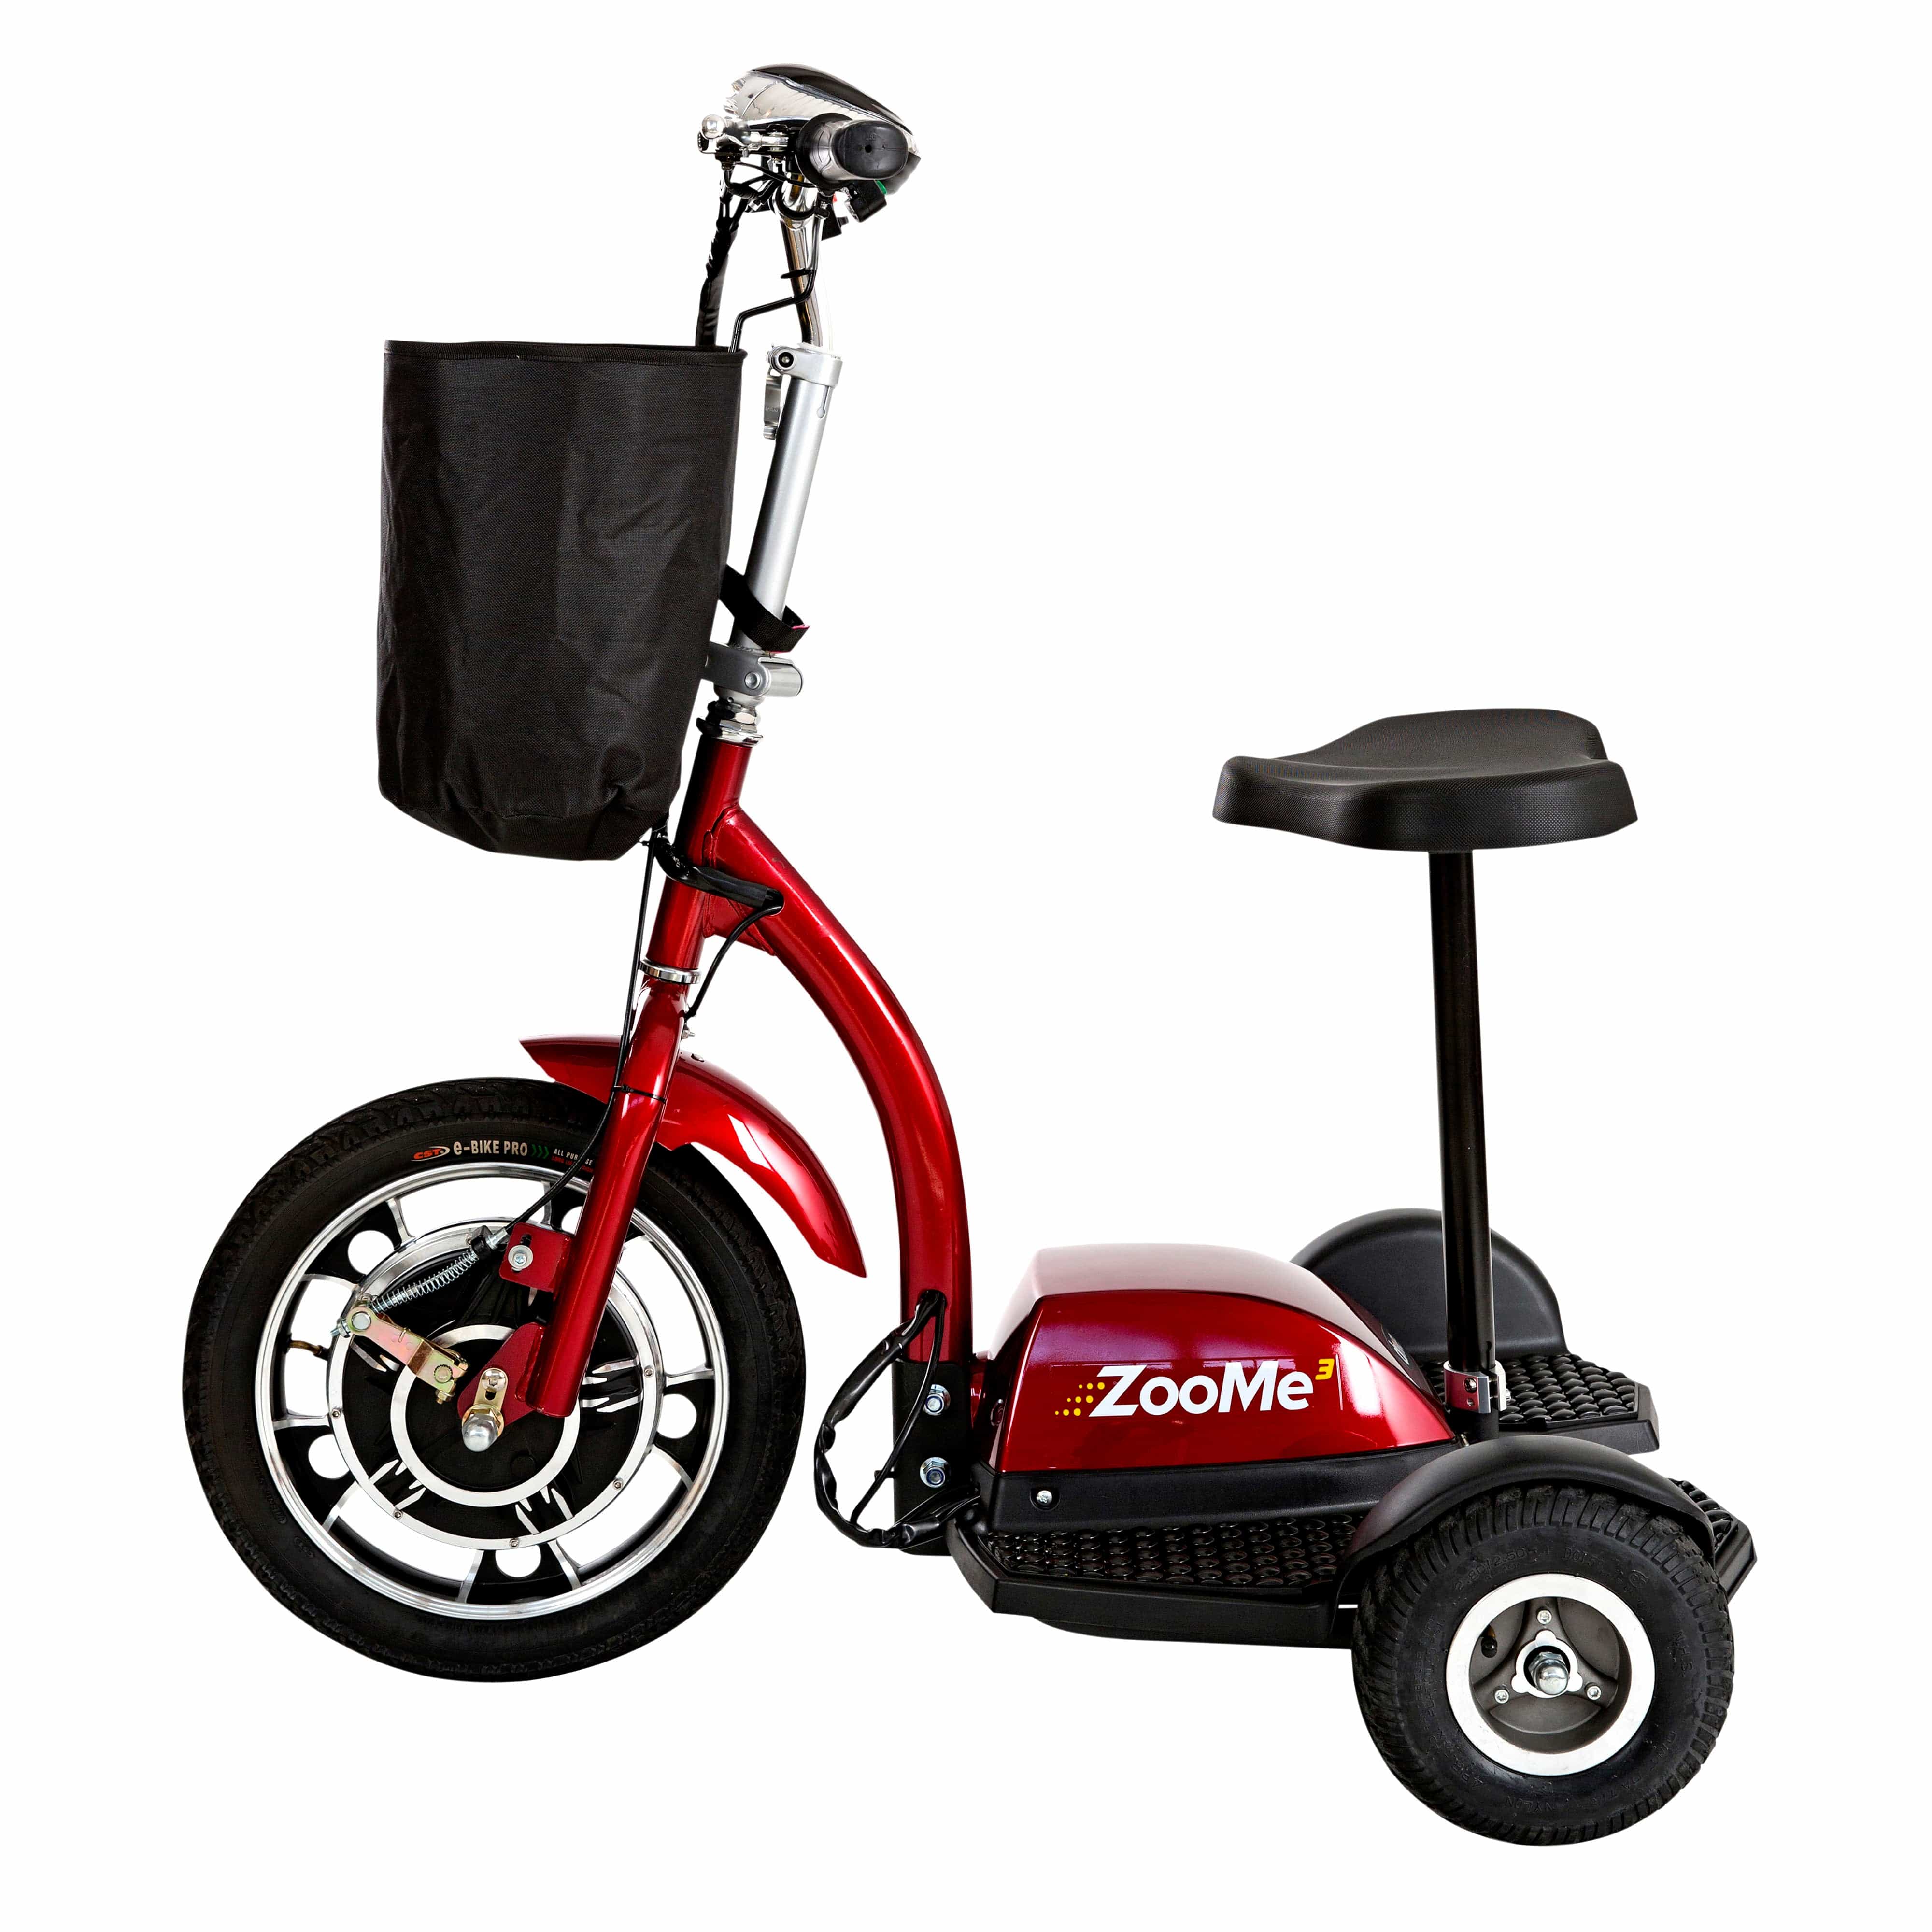 Drive Medical Drive Medical ZooMe Three Wheel Recreational Power Scooter zoome3